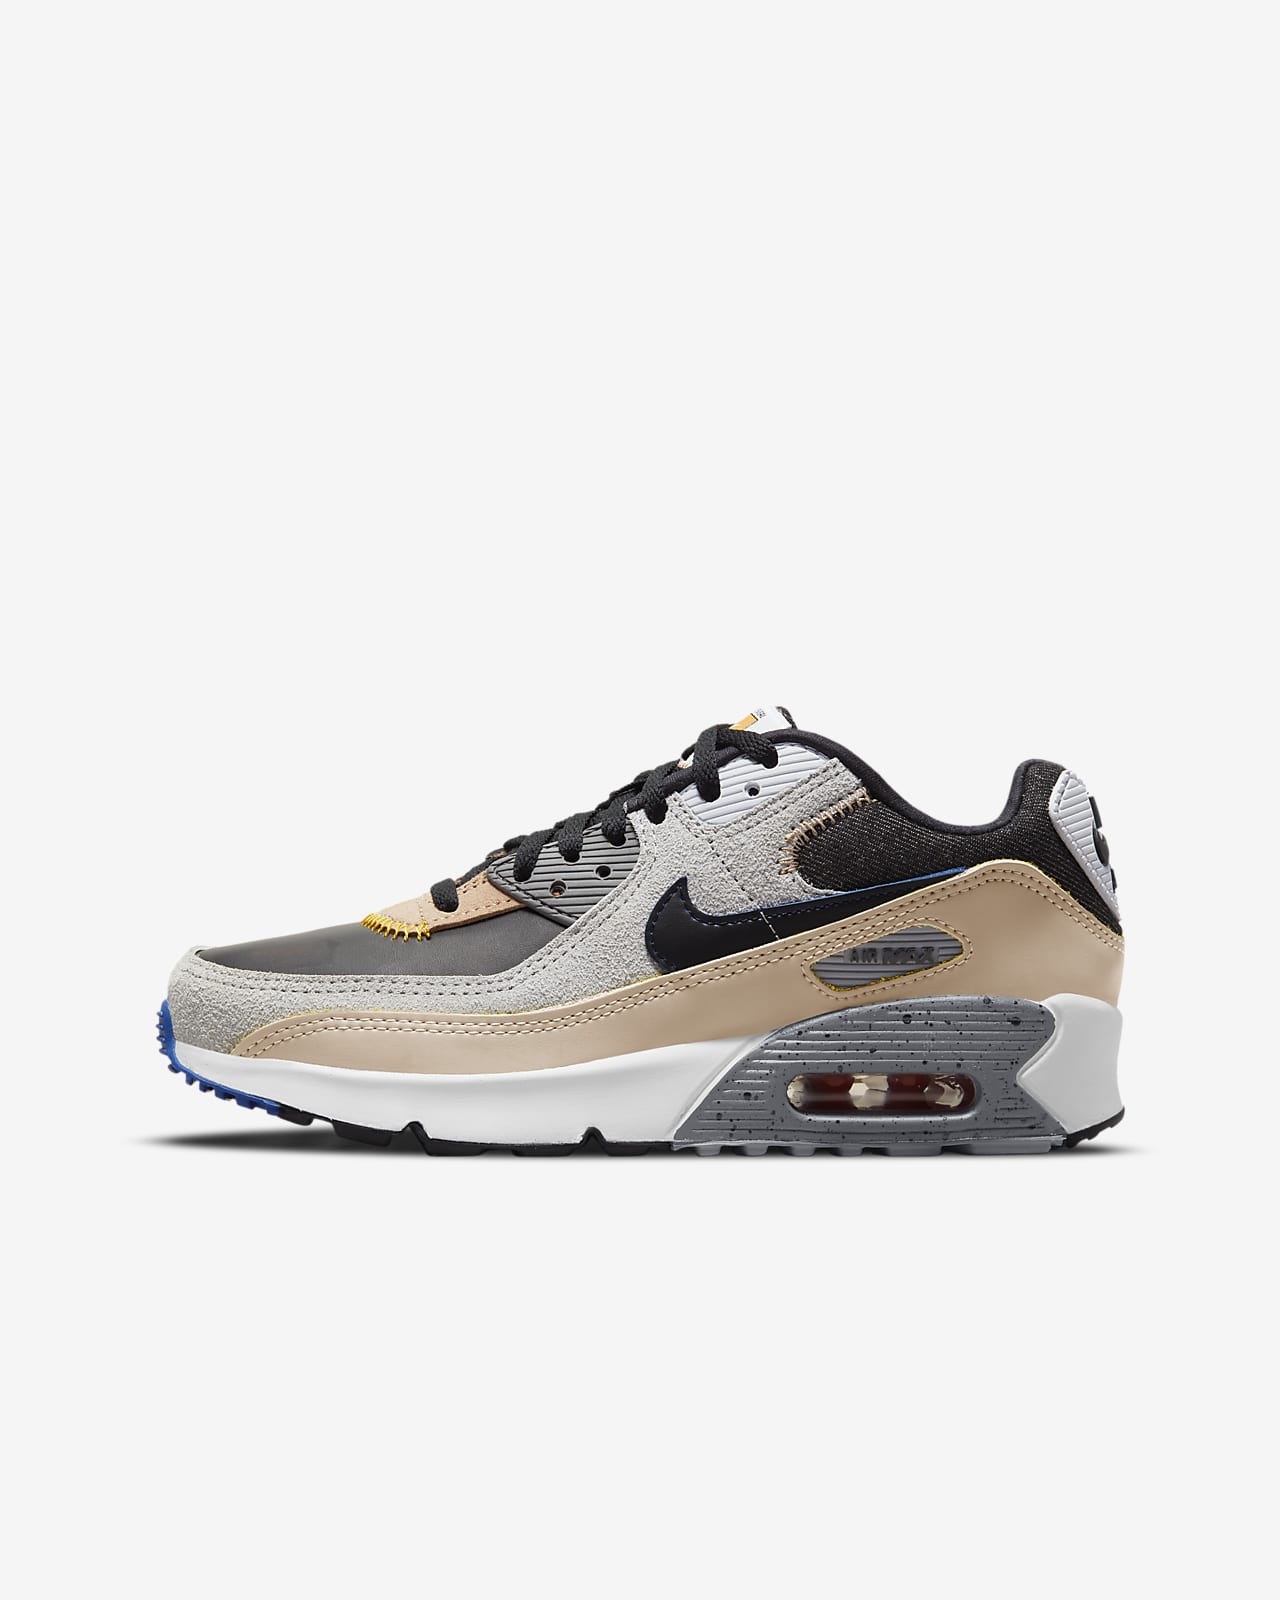 Nike Air Max Outlet, 34% - online-pmo.com